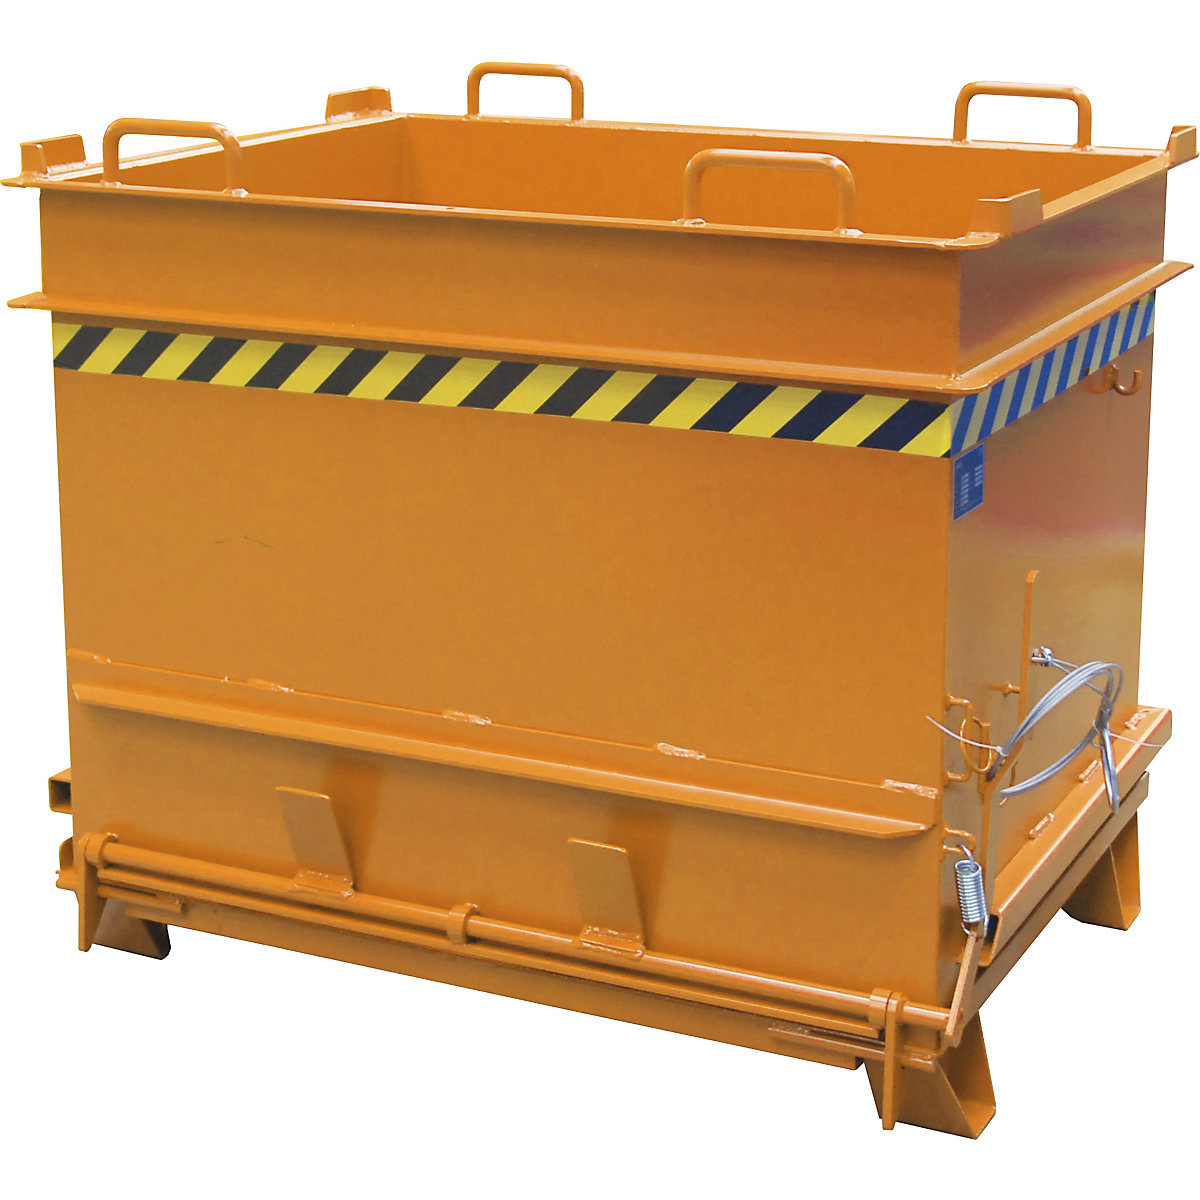 BC construction material container, with stone clamp release mechanism - eurokraft pro